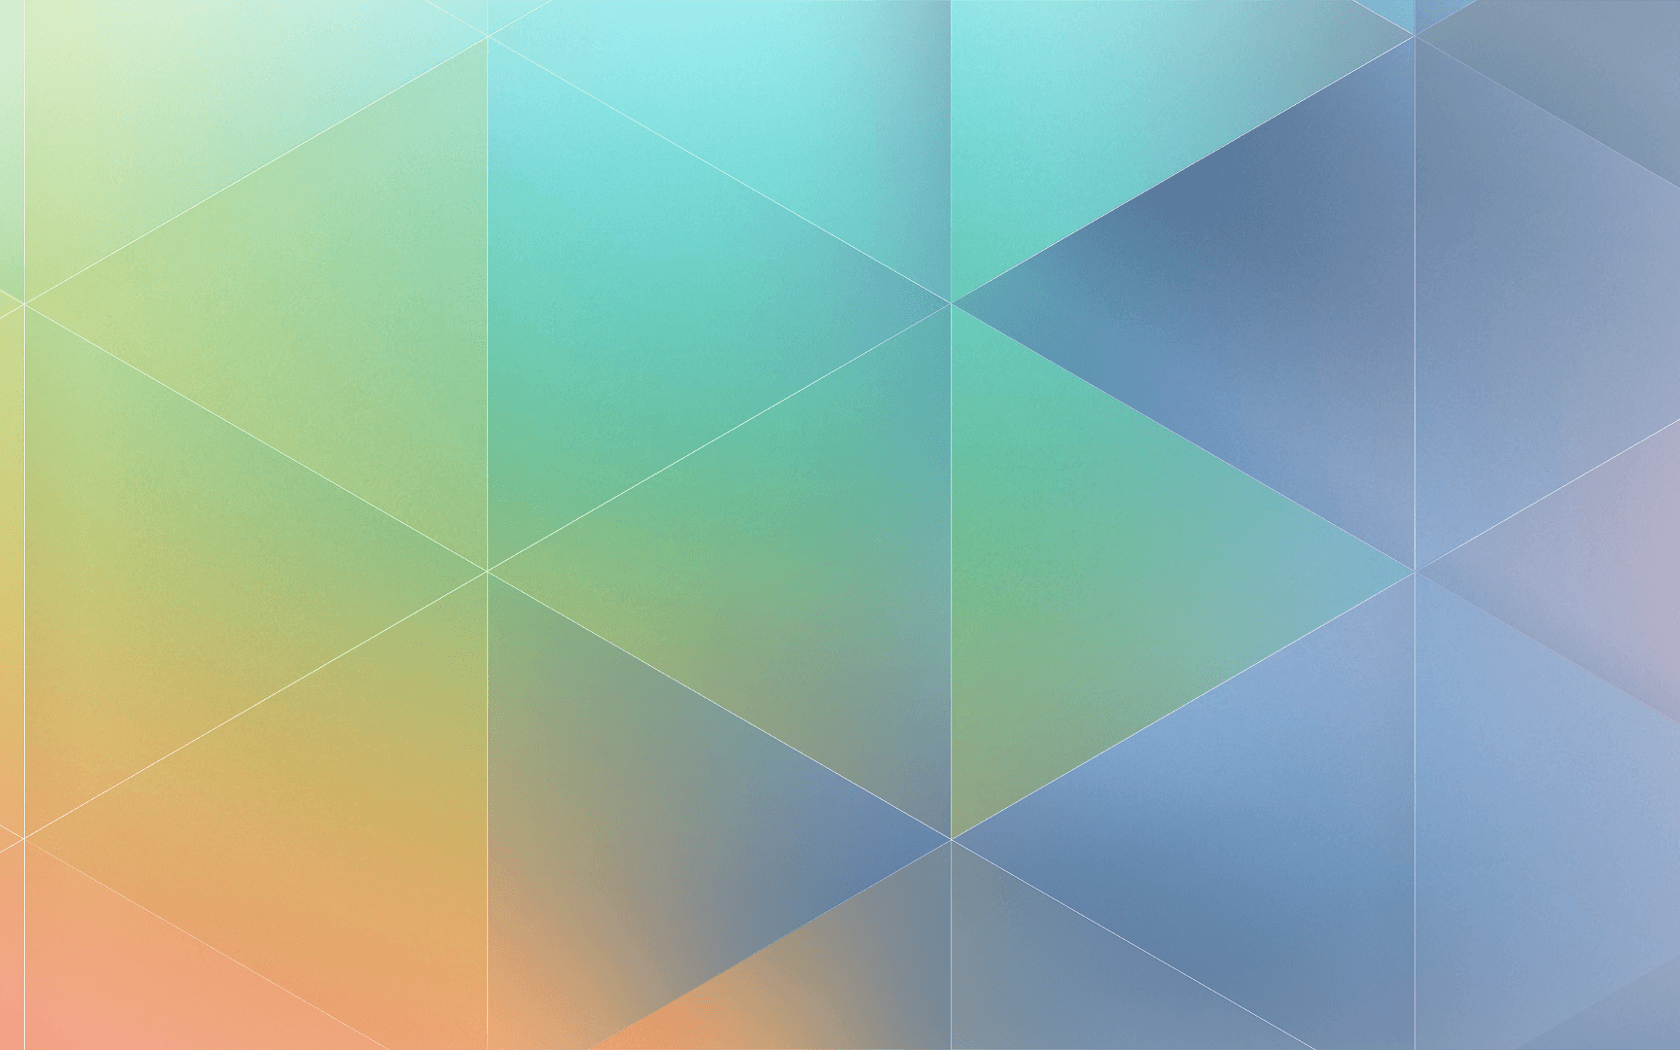 Show off your favorite Linux wallpaper!